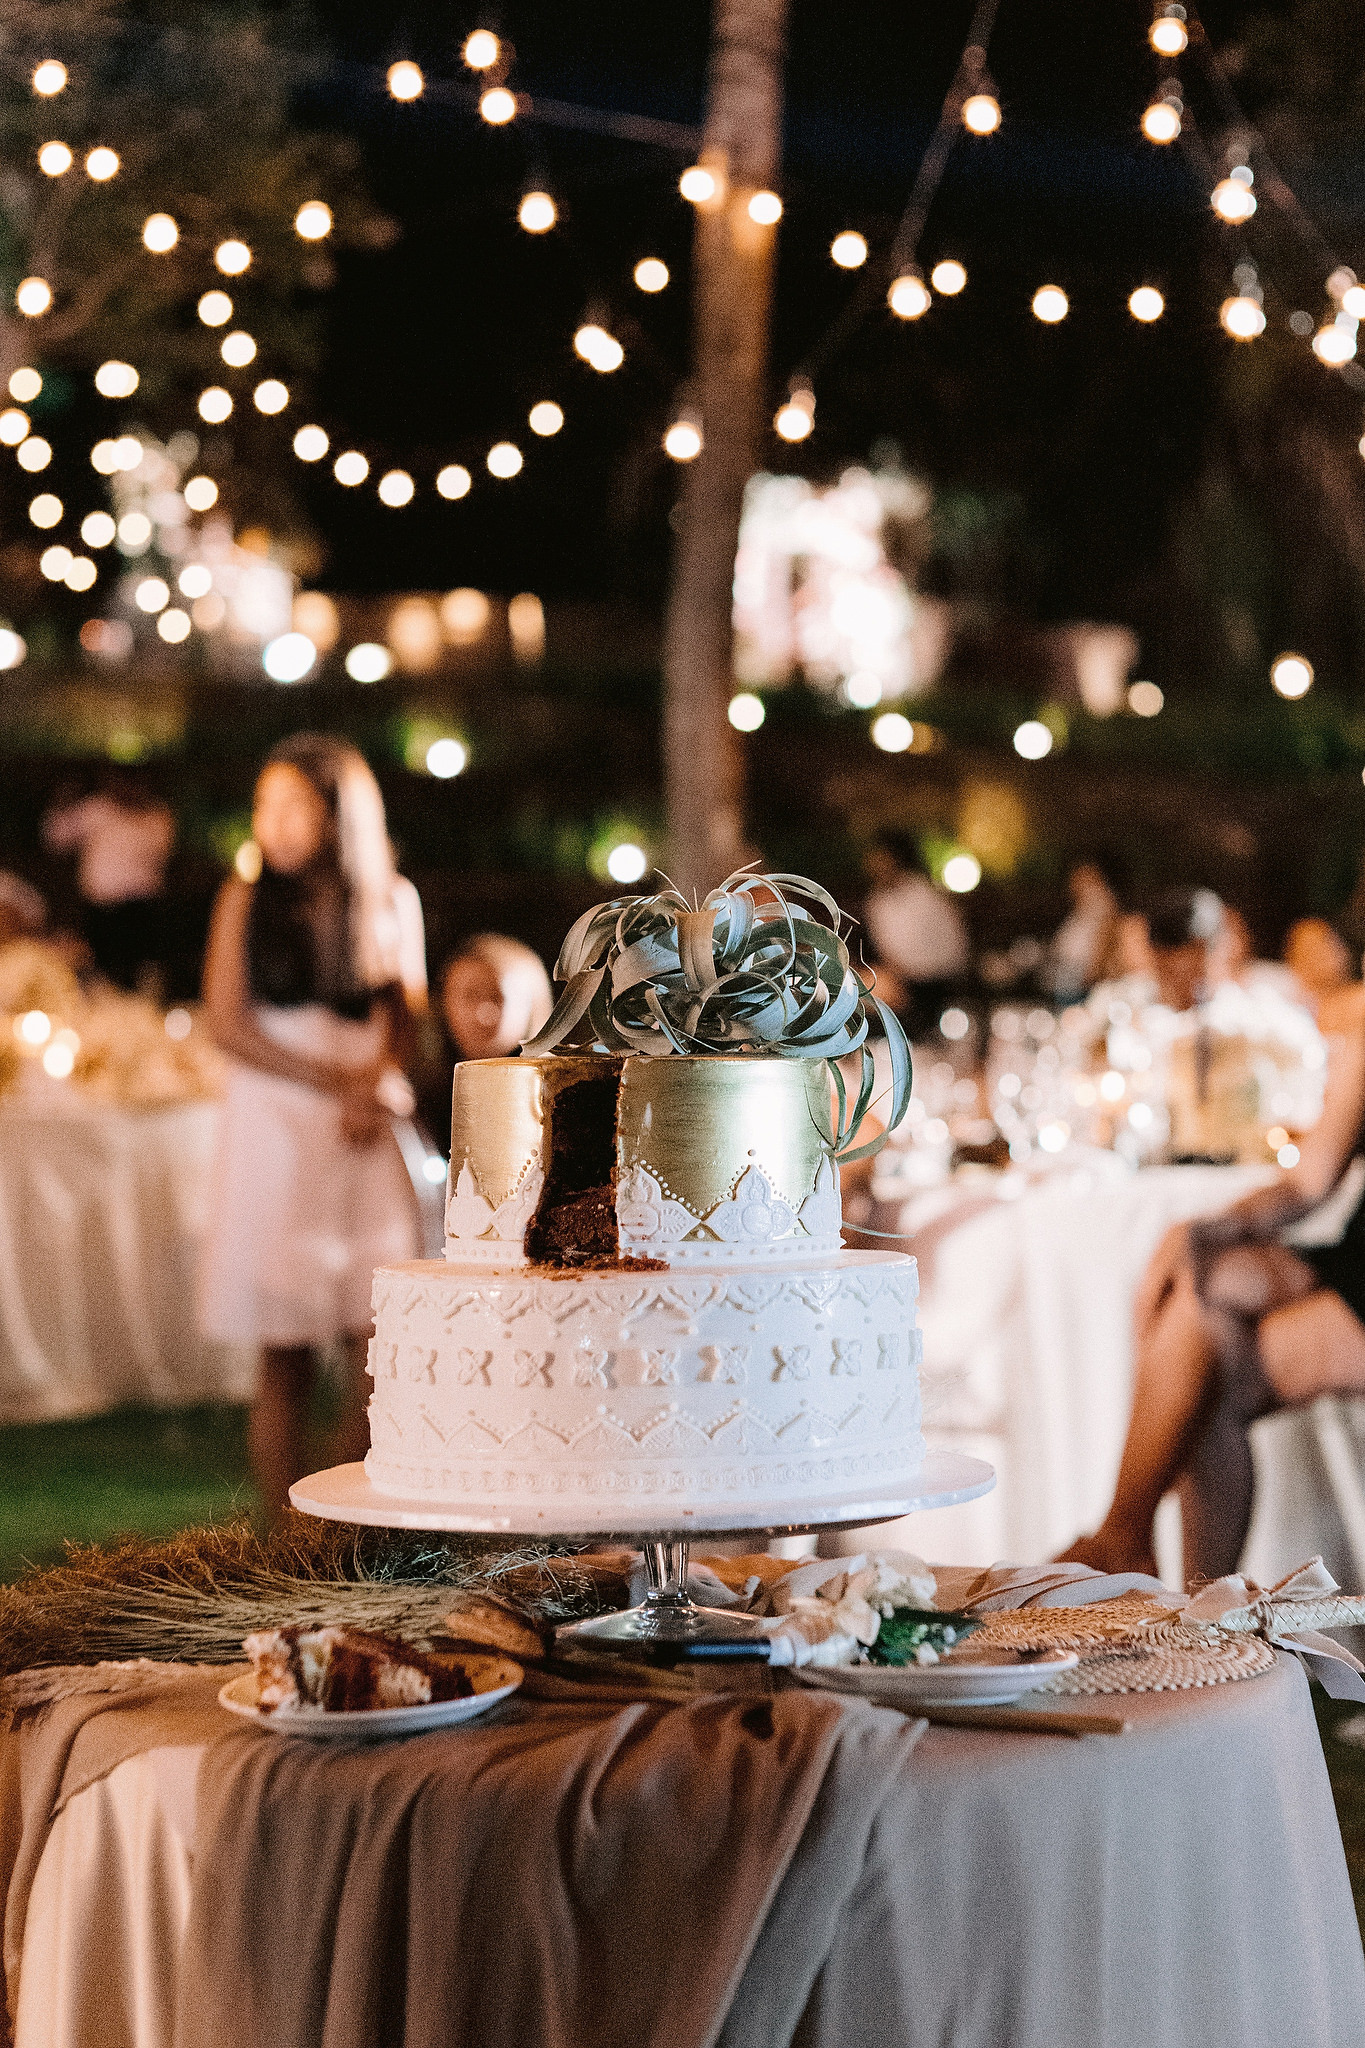 A beautiful 2-layered wedding cake with gold and white colors at a wedding in Bali, Indonesia. 